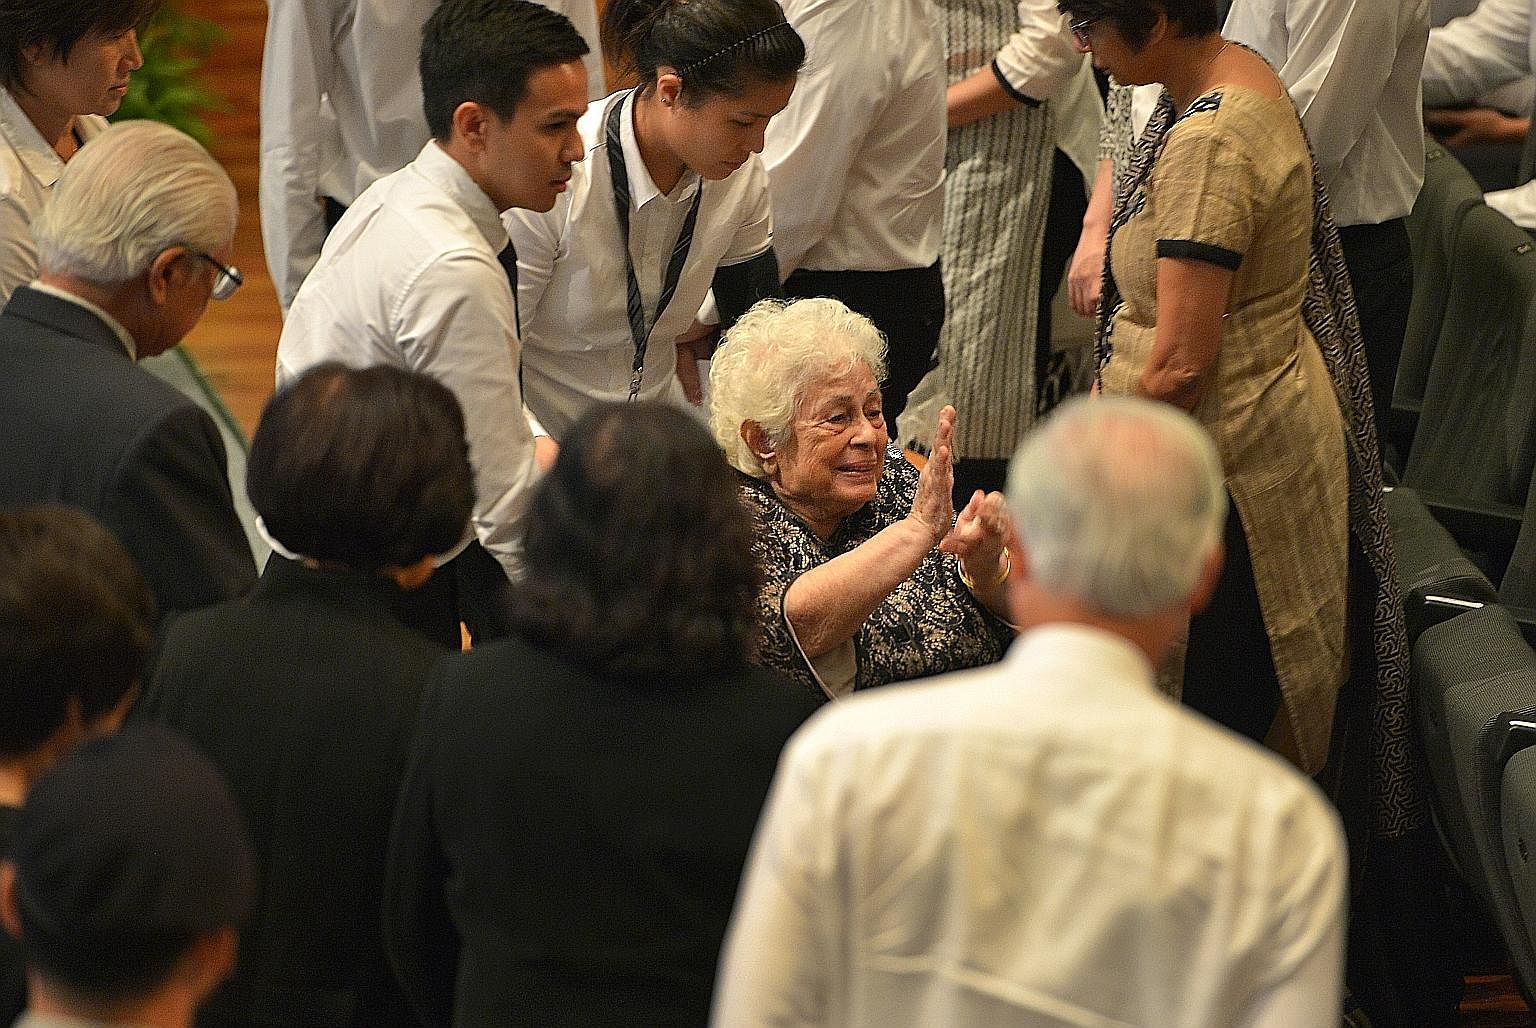 Mrs Nathan waving to attendees as she left the University Cultural Centre auditorium yesterday. The 87-year-old has been hailed as the anchor for Mr Nathan. As PM Lee put it in the most poignant line in his eulogy for Mr Nathan: "The central and brig